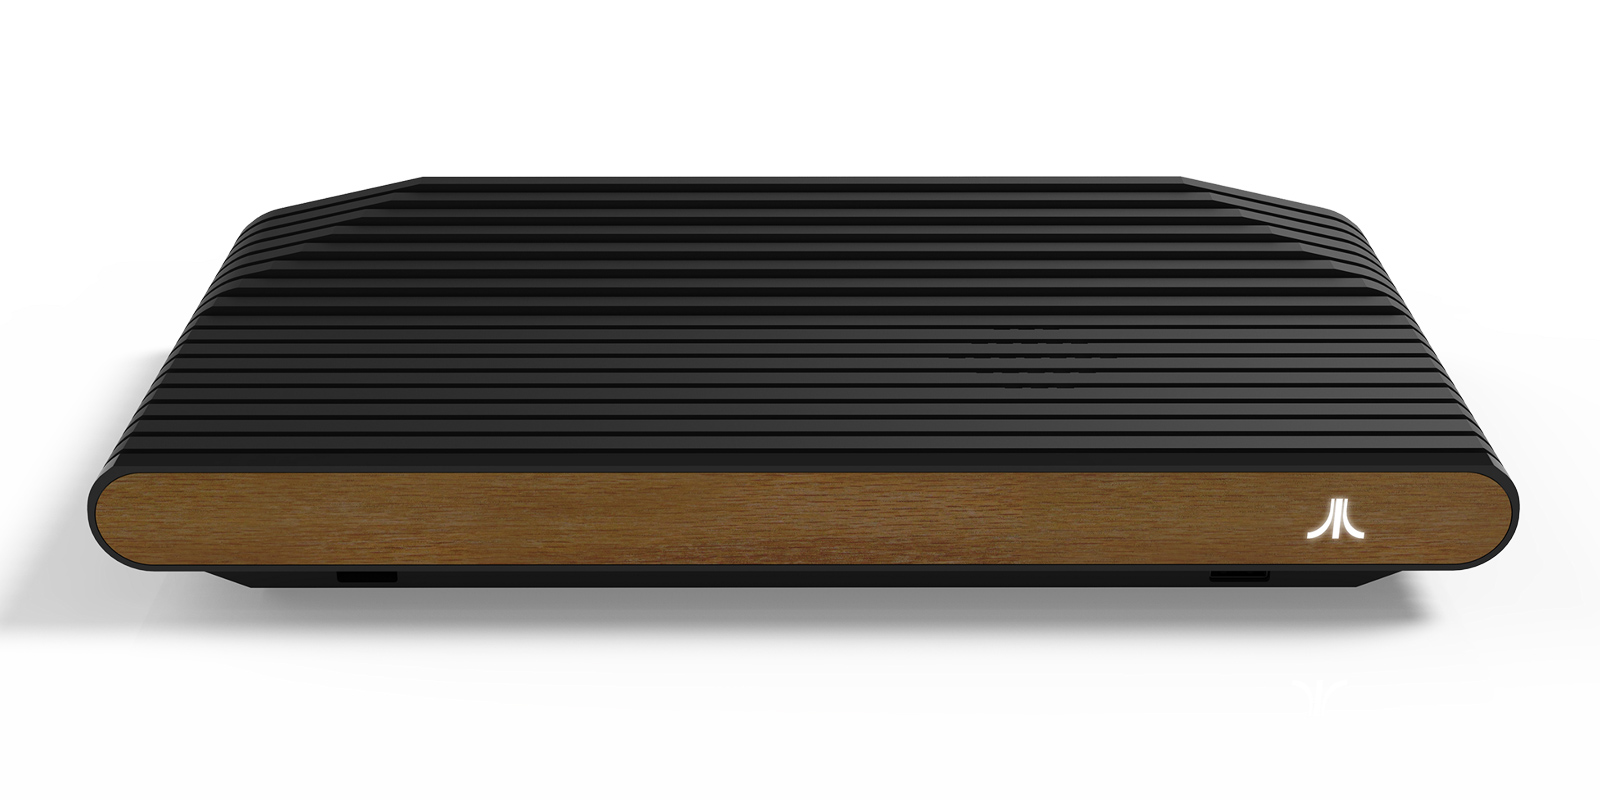 The first Atari VCS units should be ready by mid-June